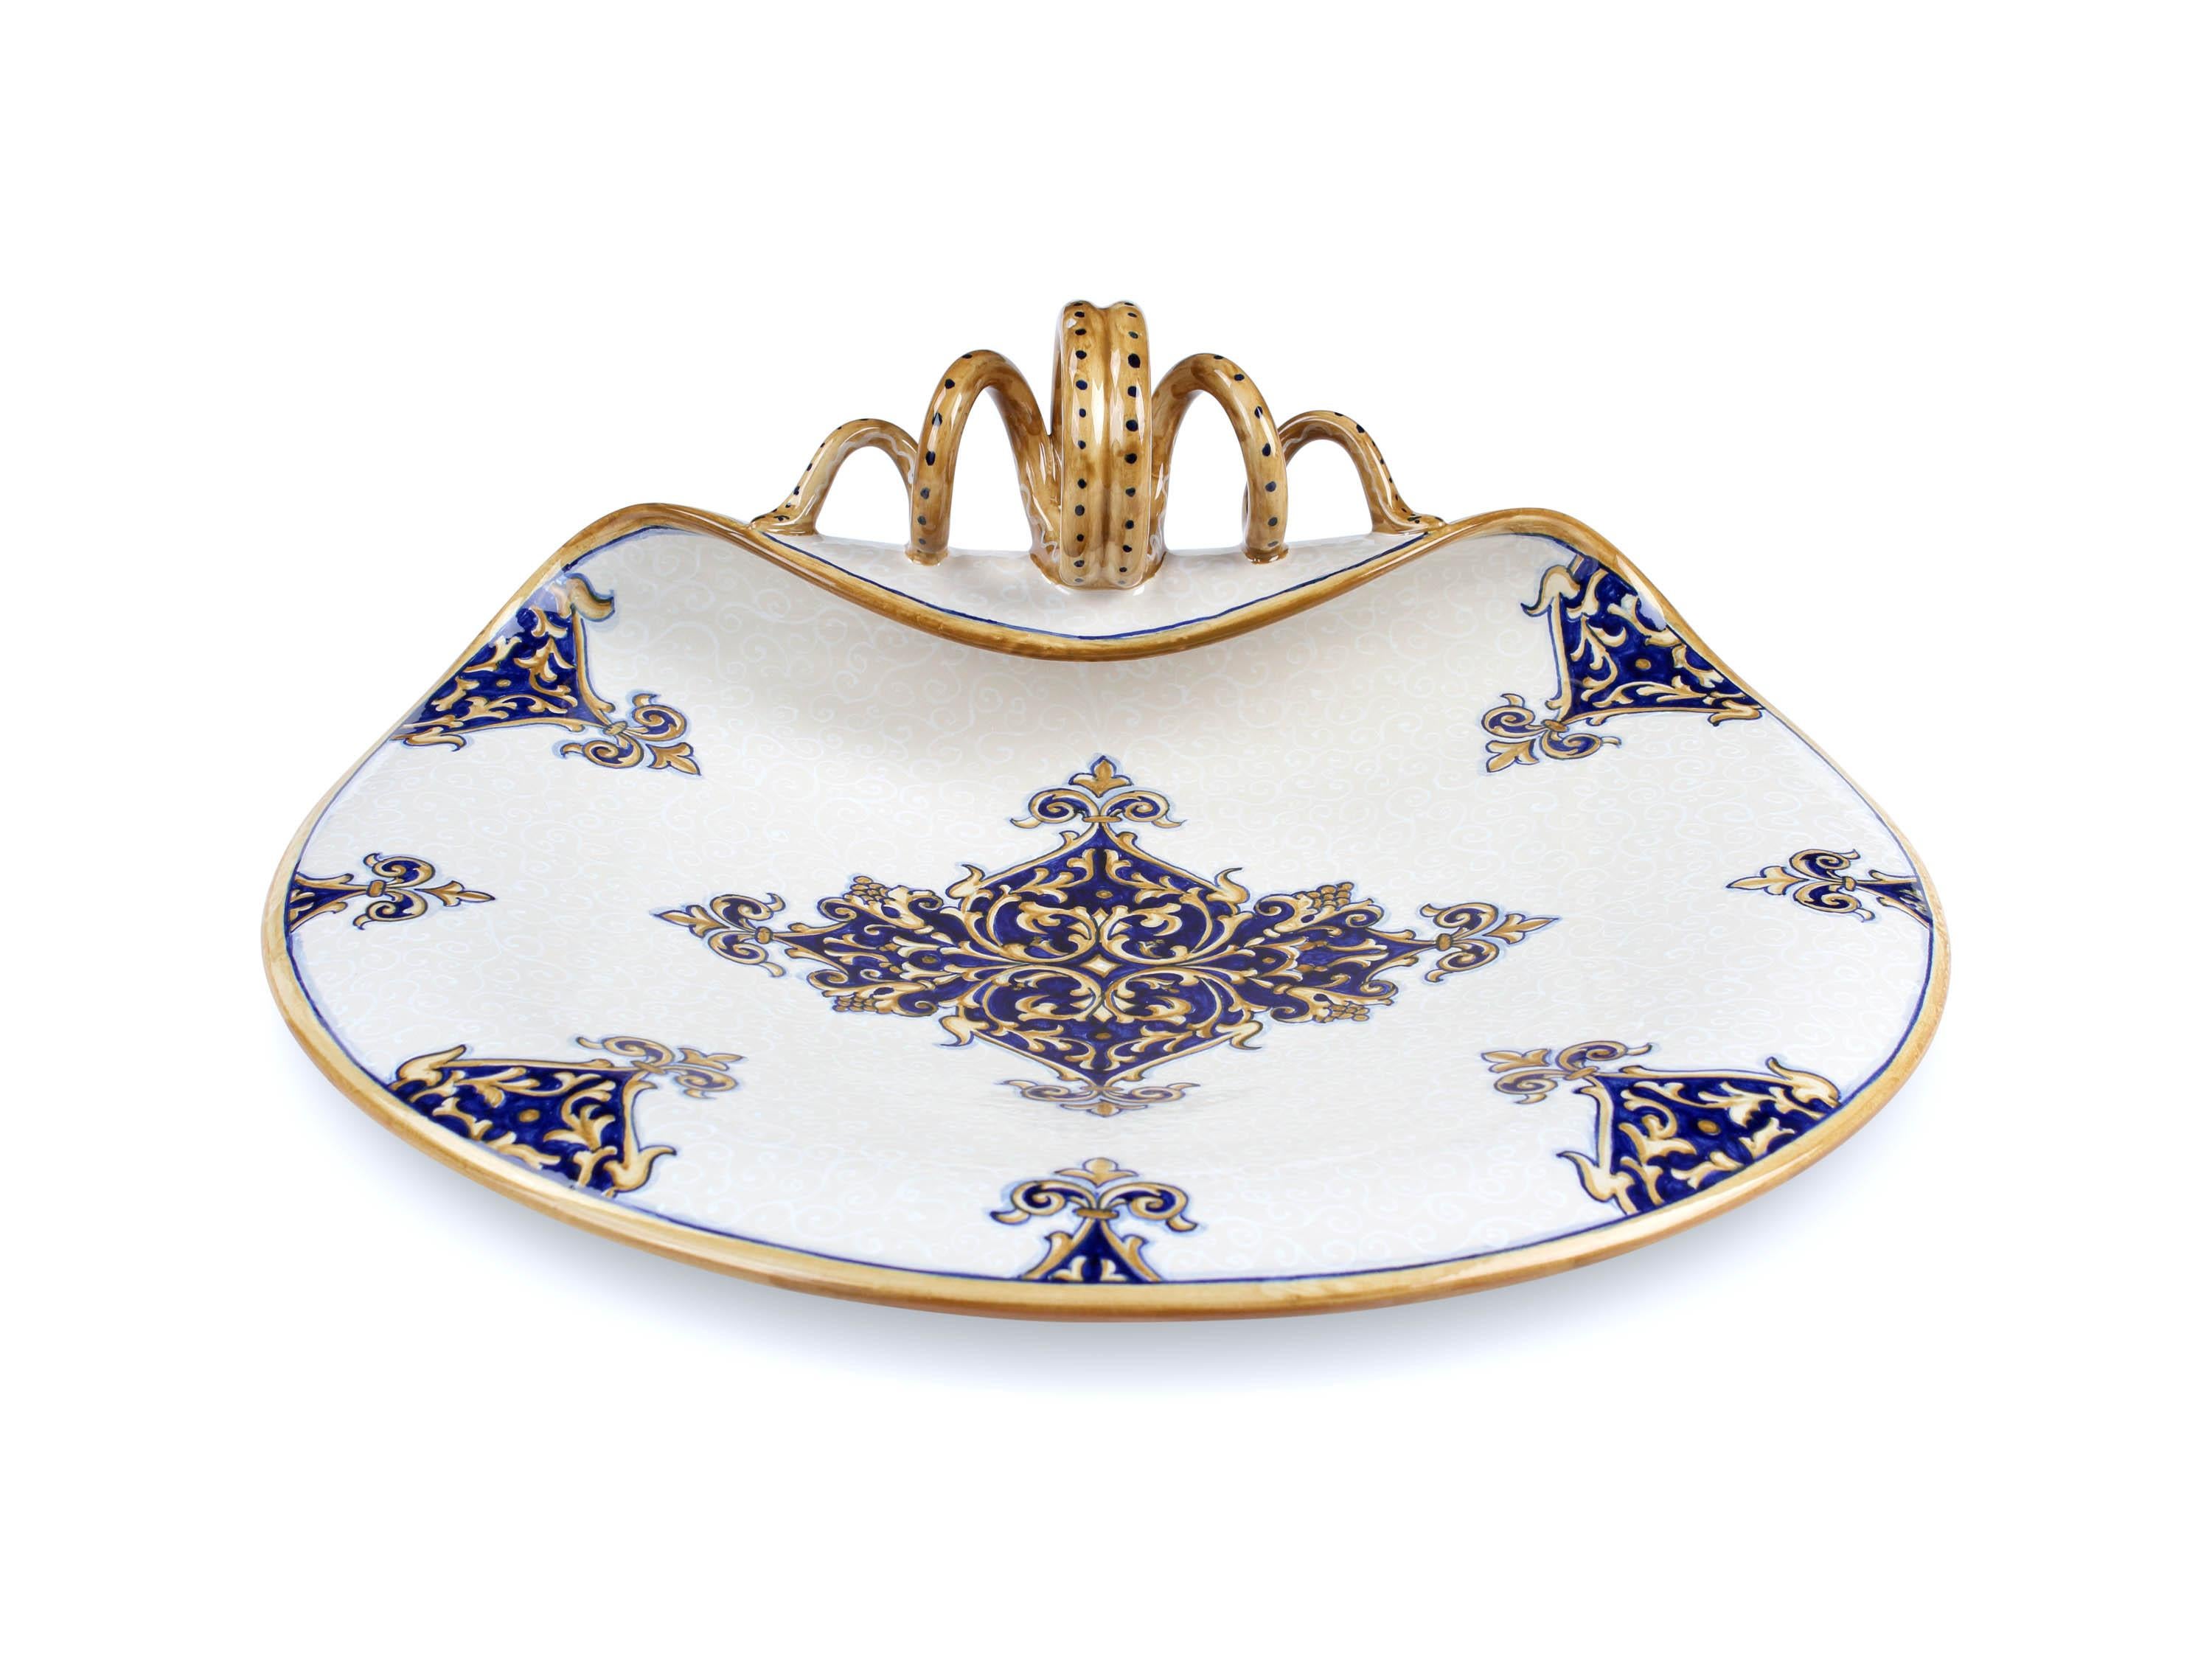 This splendid ceramic plate is handmade and hand-painted in Italy following the original Renaissance painting technique, unchanged over time, which we observe to the letter: it is decorated in majolica painted in duotone on a white background, along